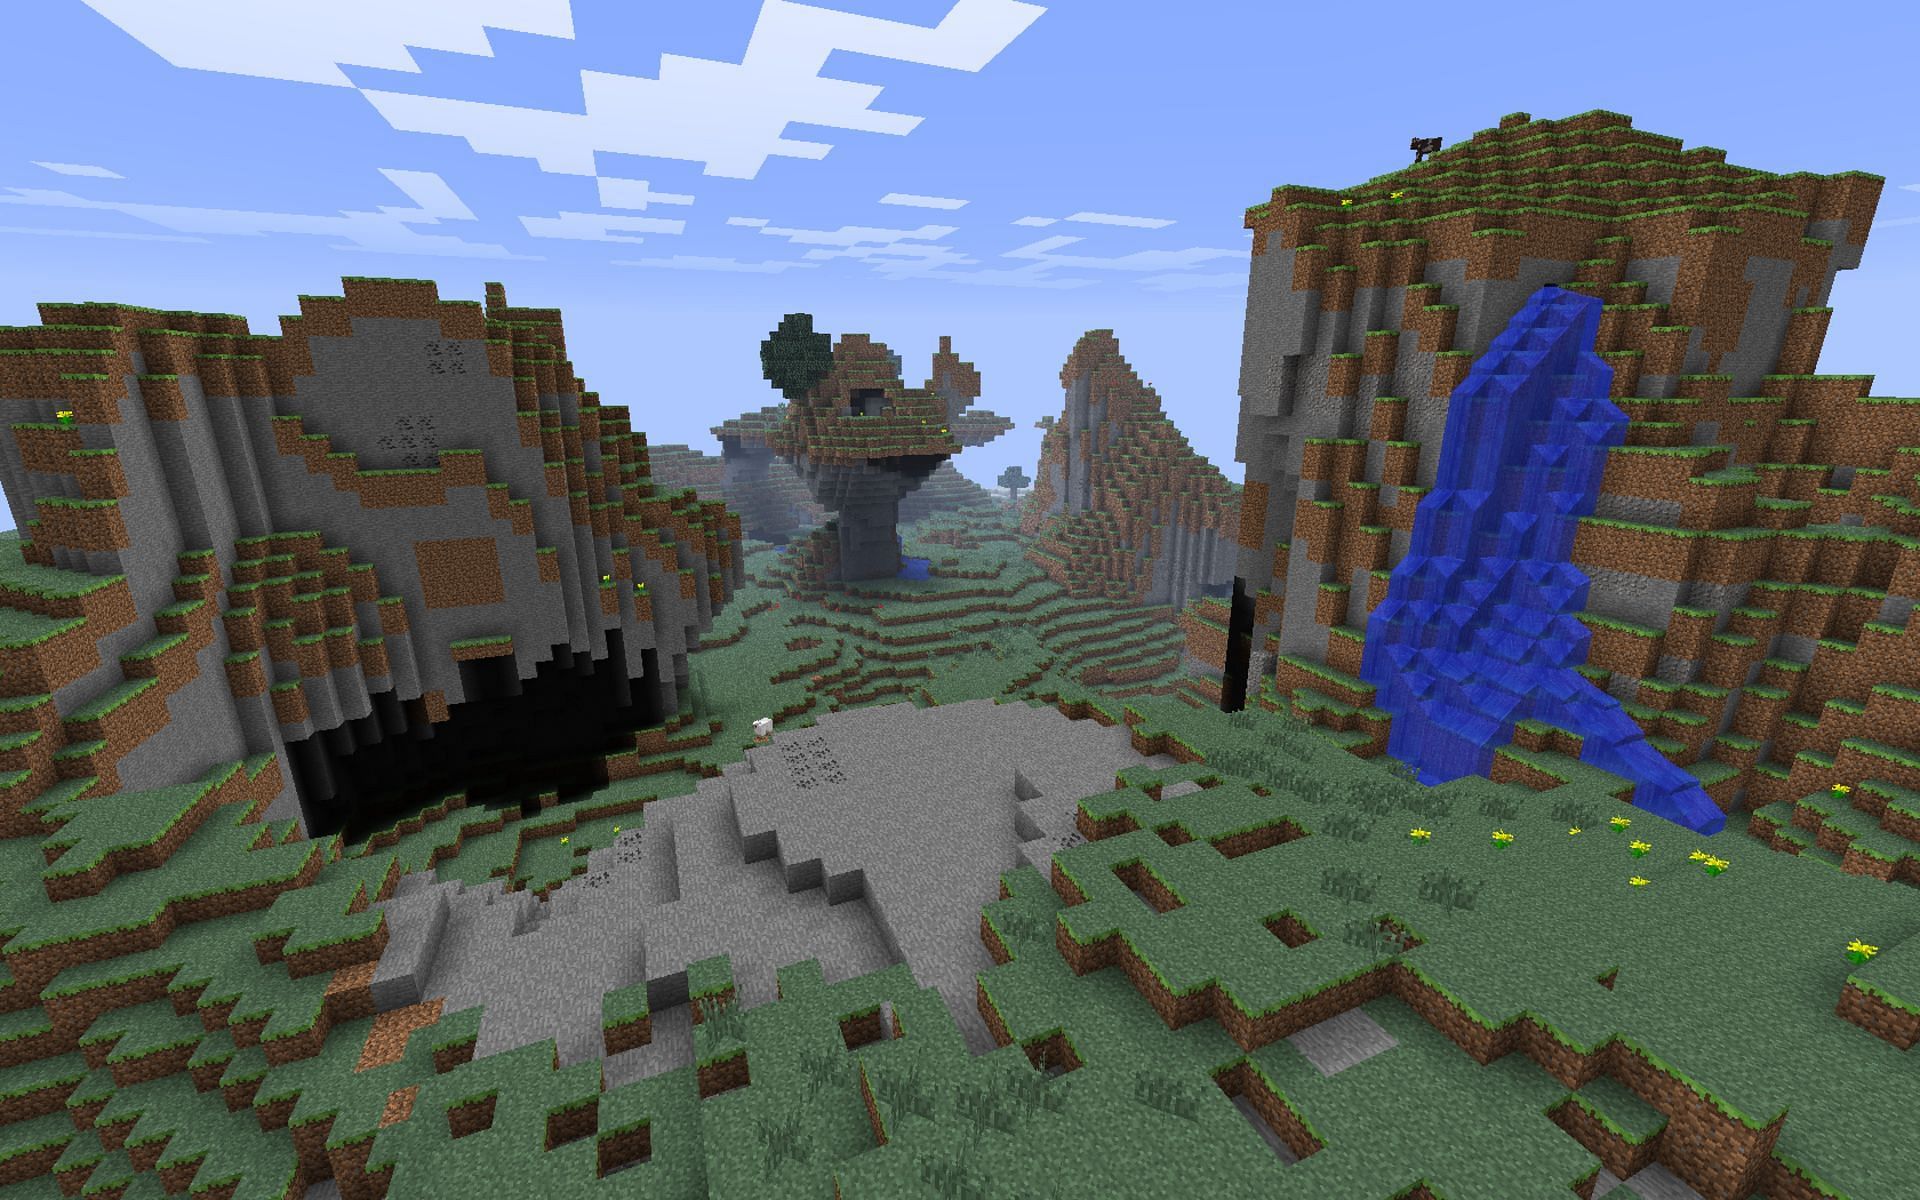 Windswept hills in Minecraft: Everything players need to know